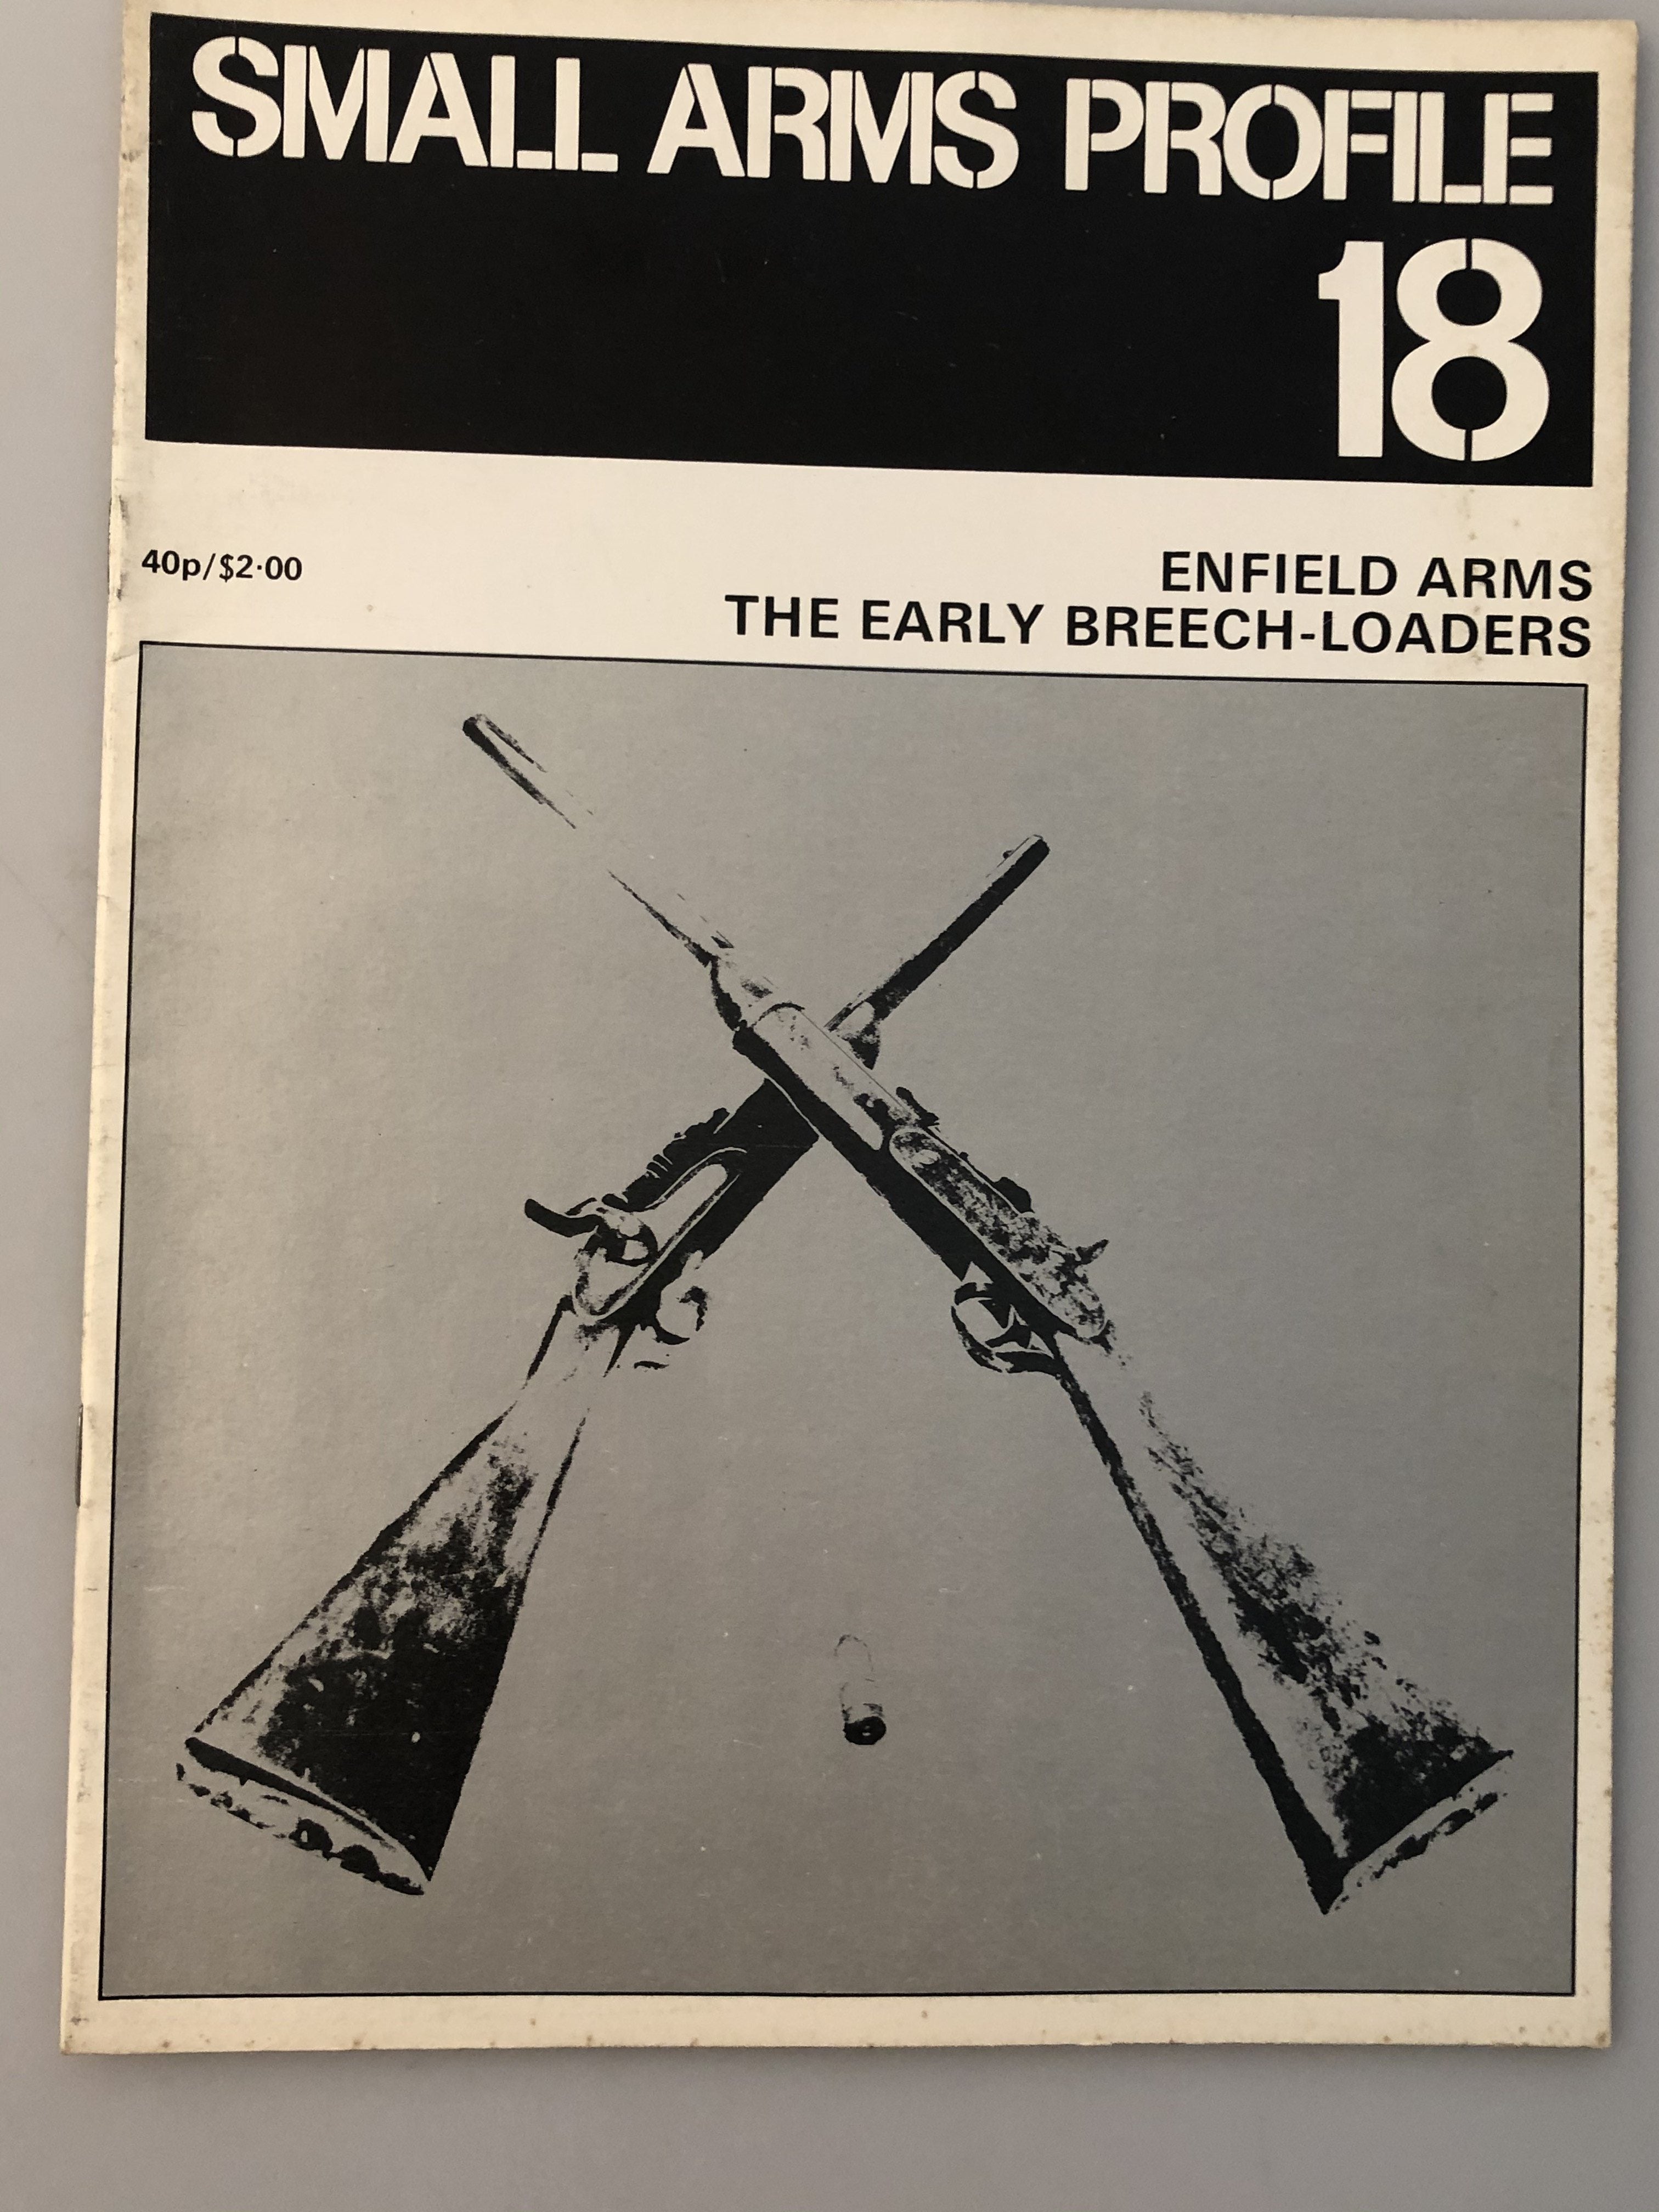 Small Arms Profile 18 Enfield Arms The Early Breech-Loaders Profile Publications (Box 11) SAP18